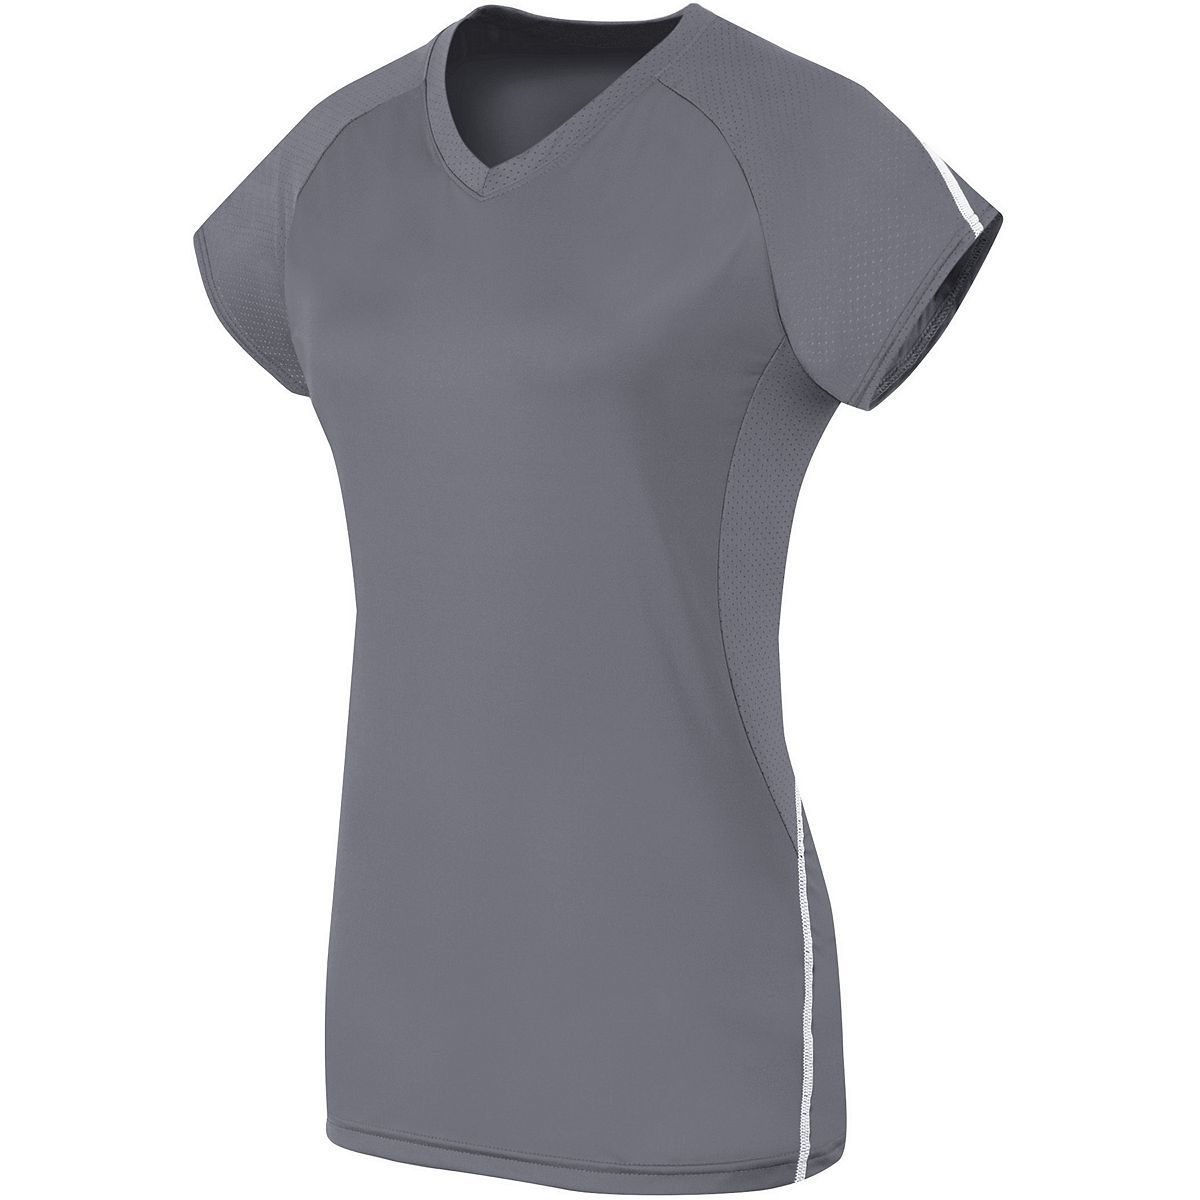 High 5 Ladies Short Sleeve Solid Jersey in Graphite/White  -Part of the Ladies, Ladies-Jersey, High5-Products, Volleyball, Shirts product lines at KanaleyCreations.com